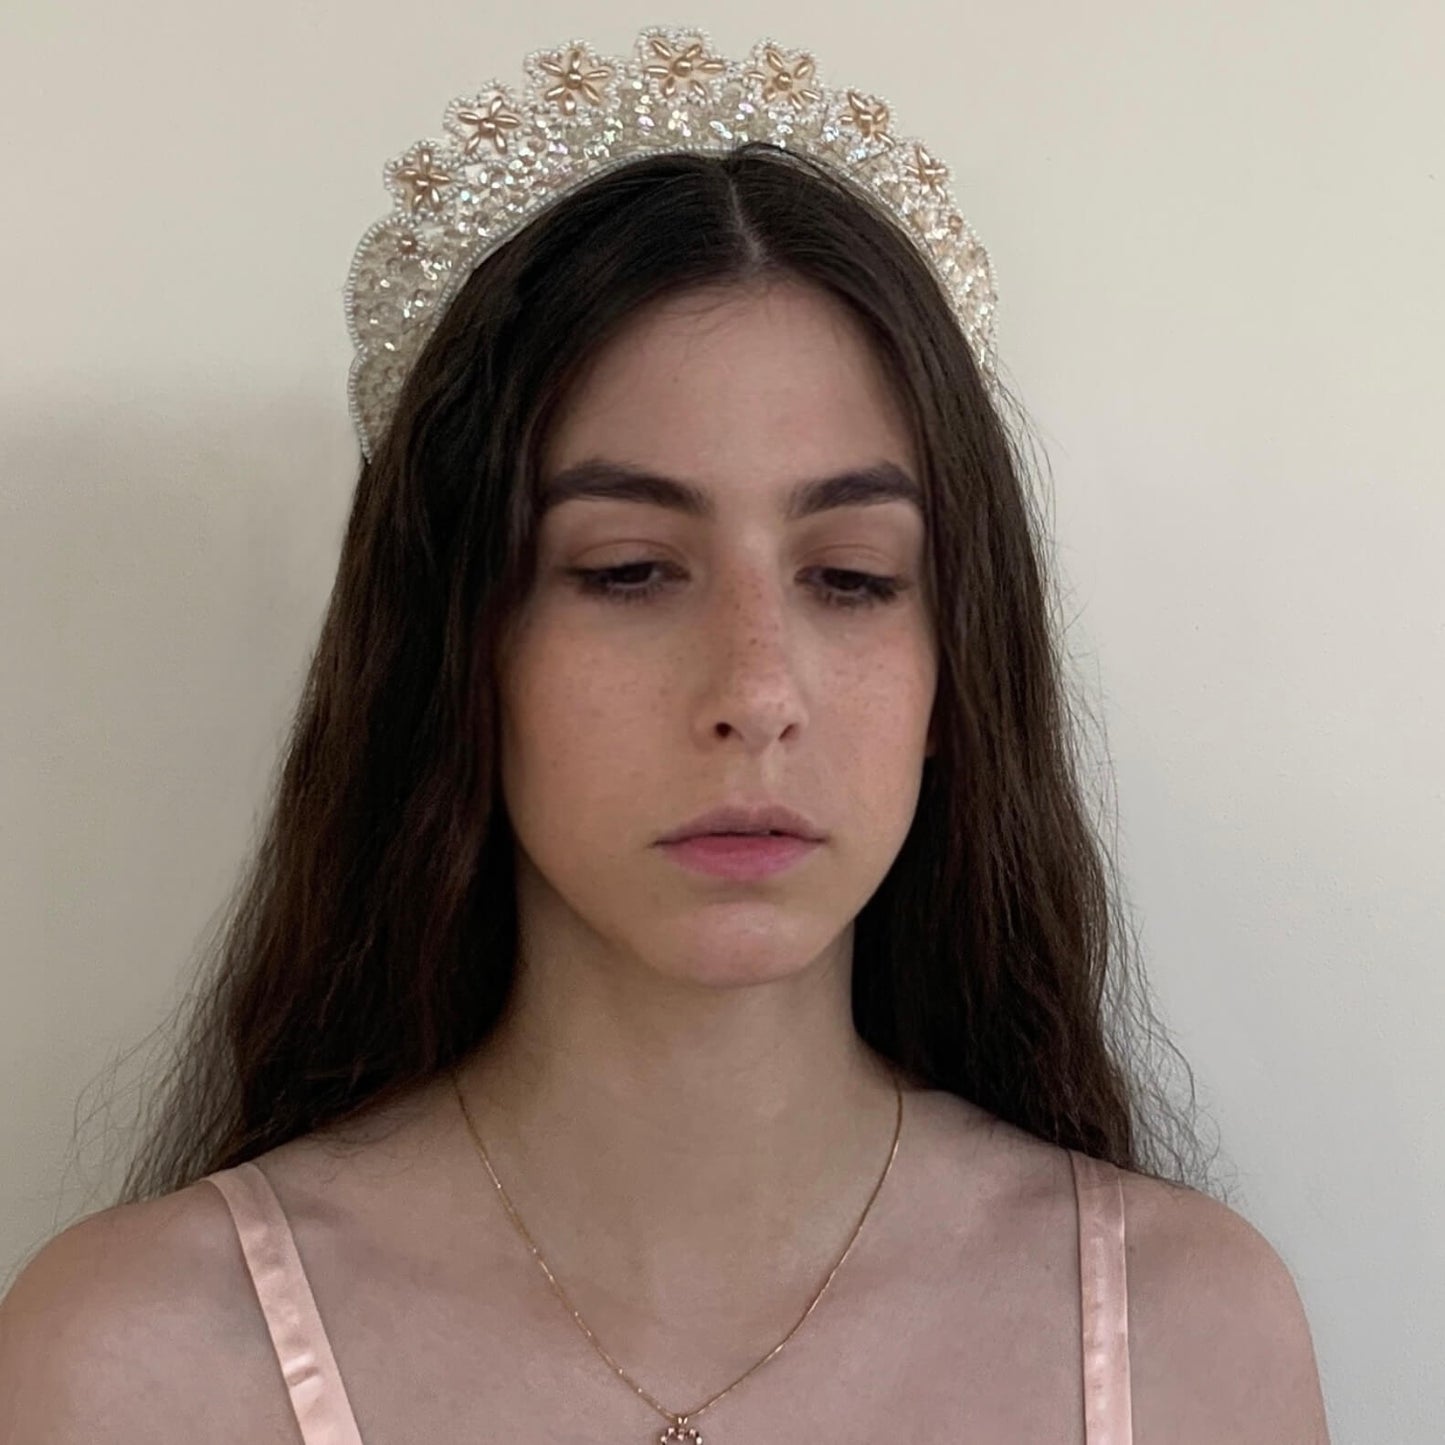 Vintage pearl crown from the 1930s with ivory beads and sequins on a bridal model